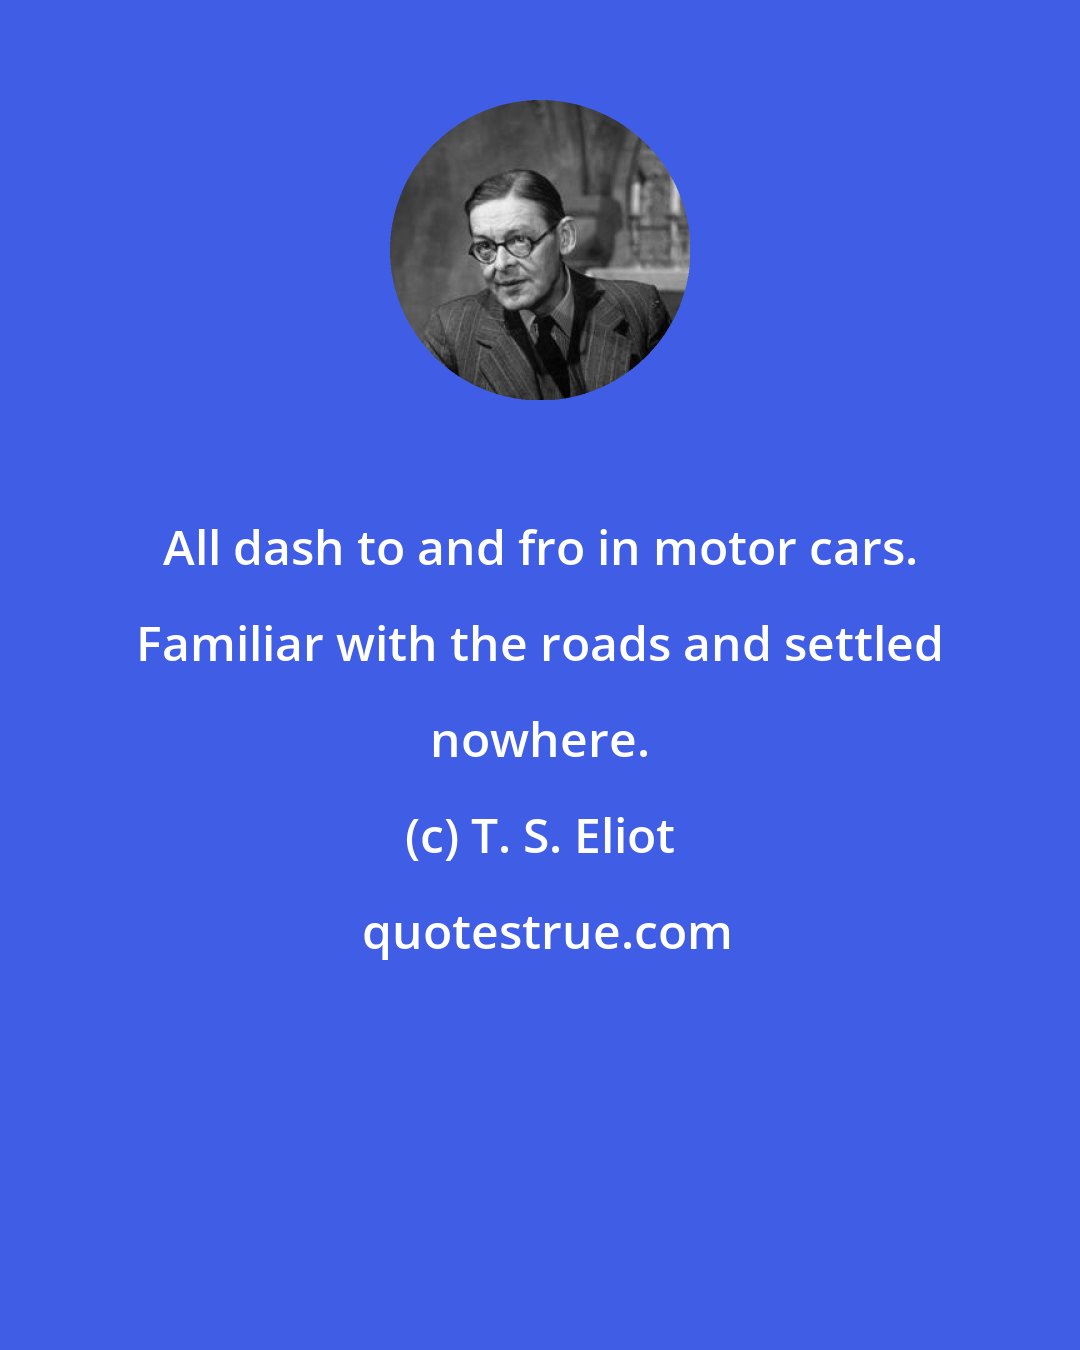 T. S. Eliot: All dash to and fro in motor cars. Familiar with the roads and settled nowhere.